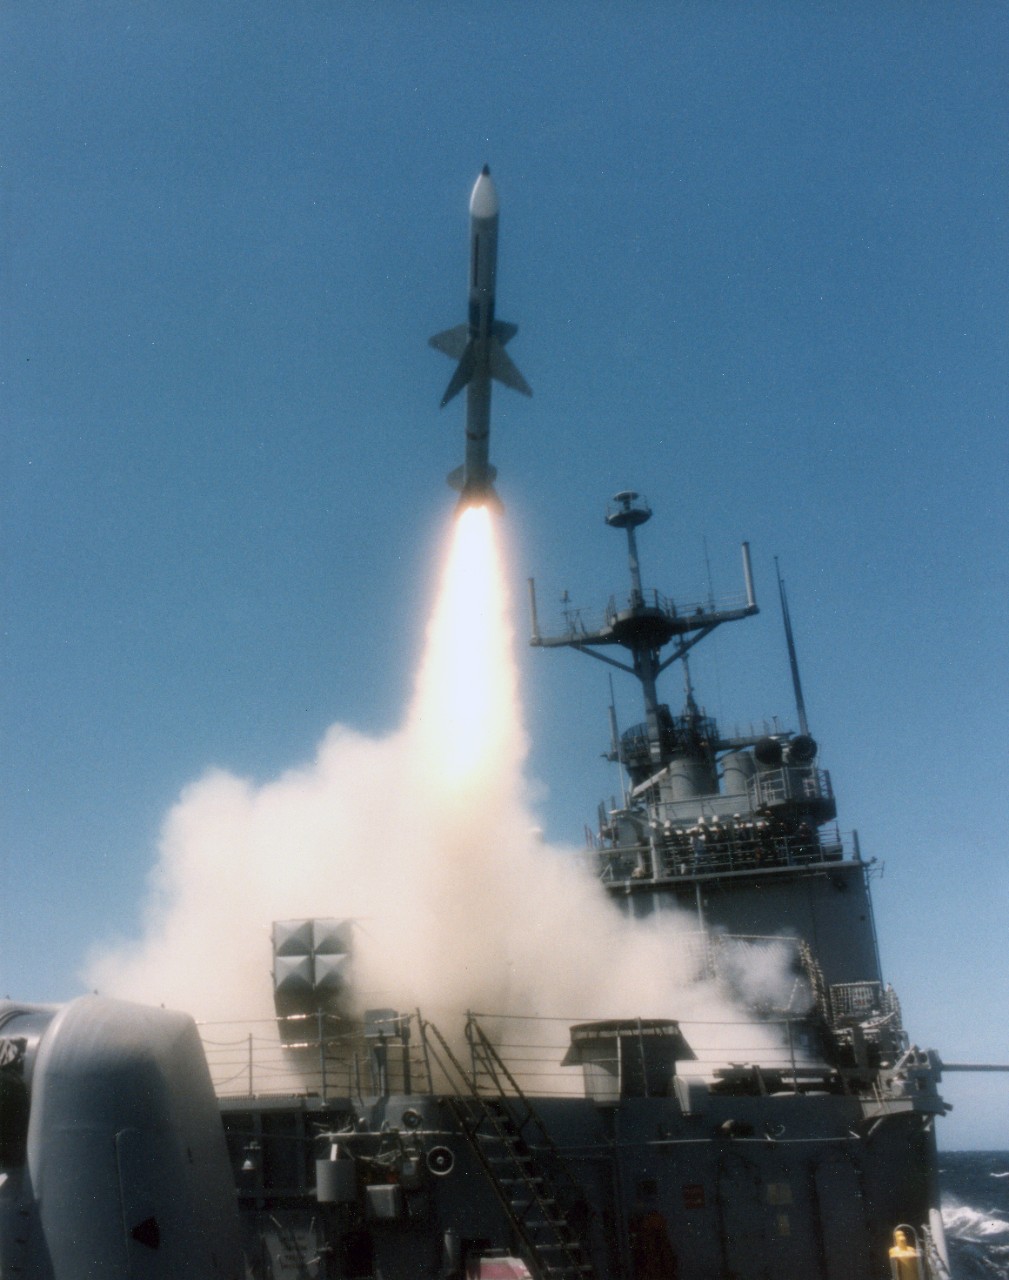 Launching of a Sea Sparrow missile. Unknown ship and date. 